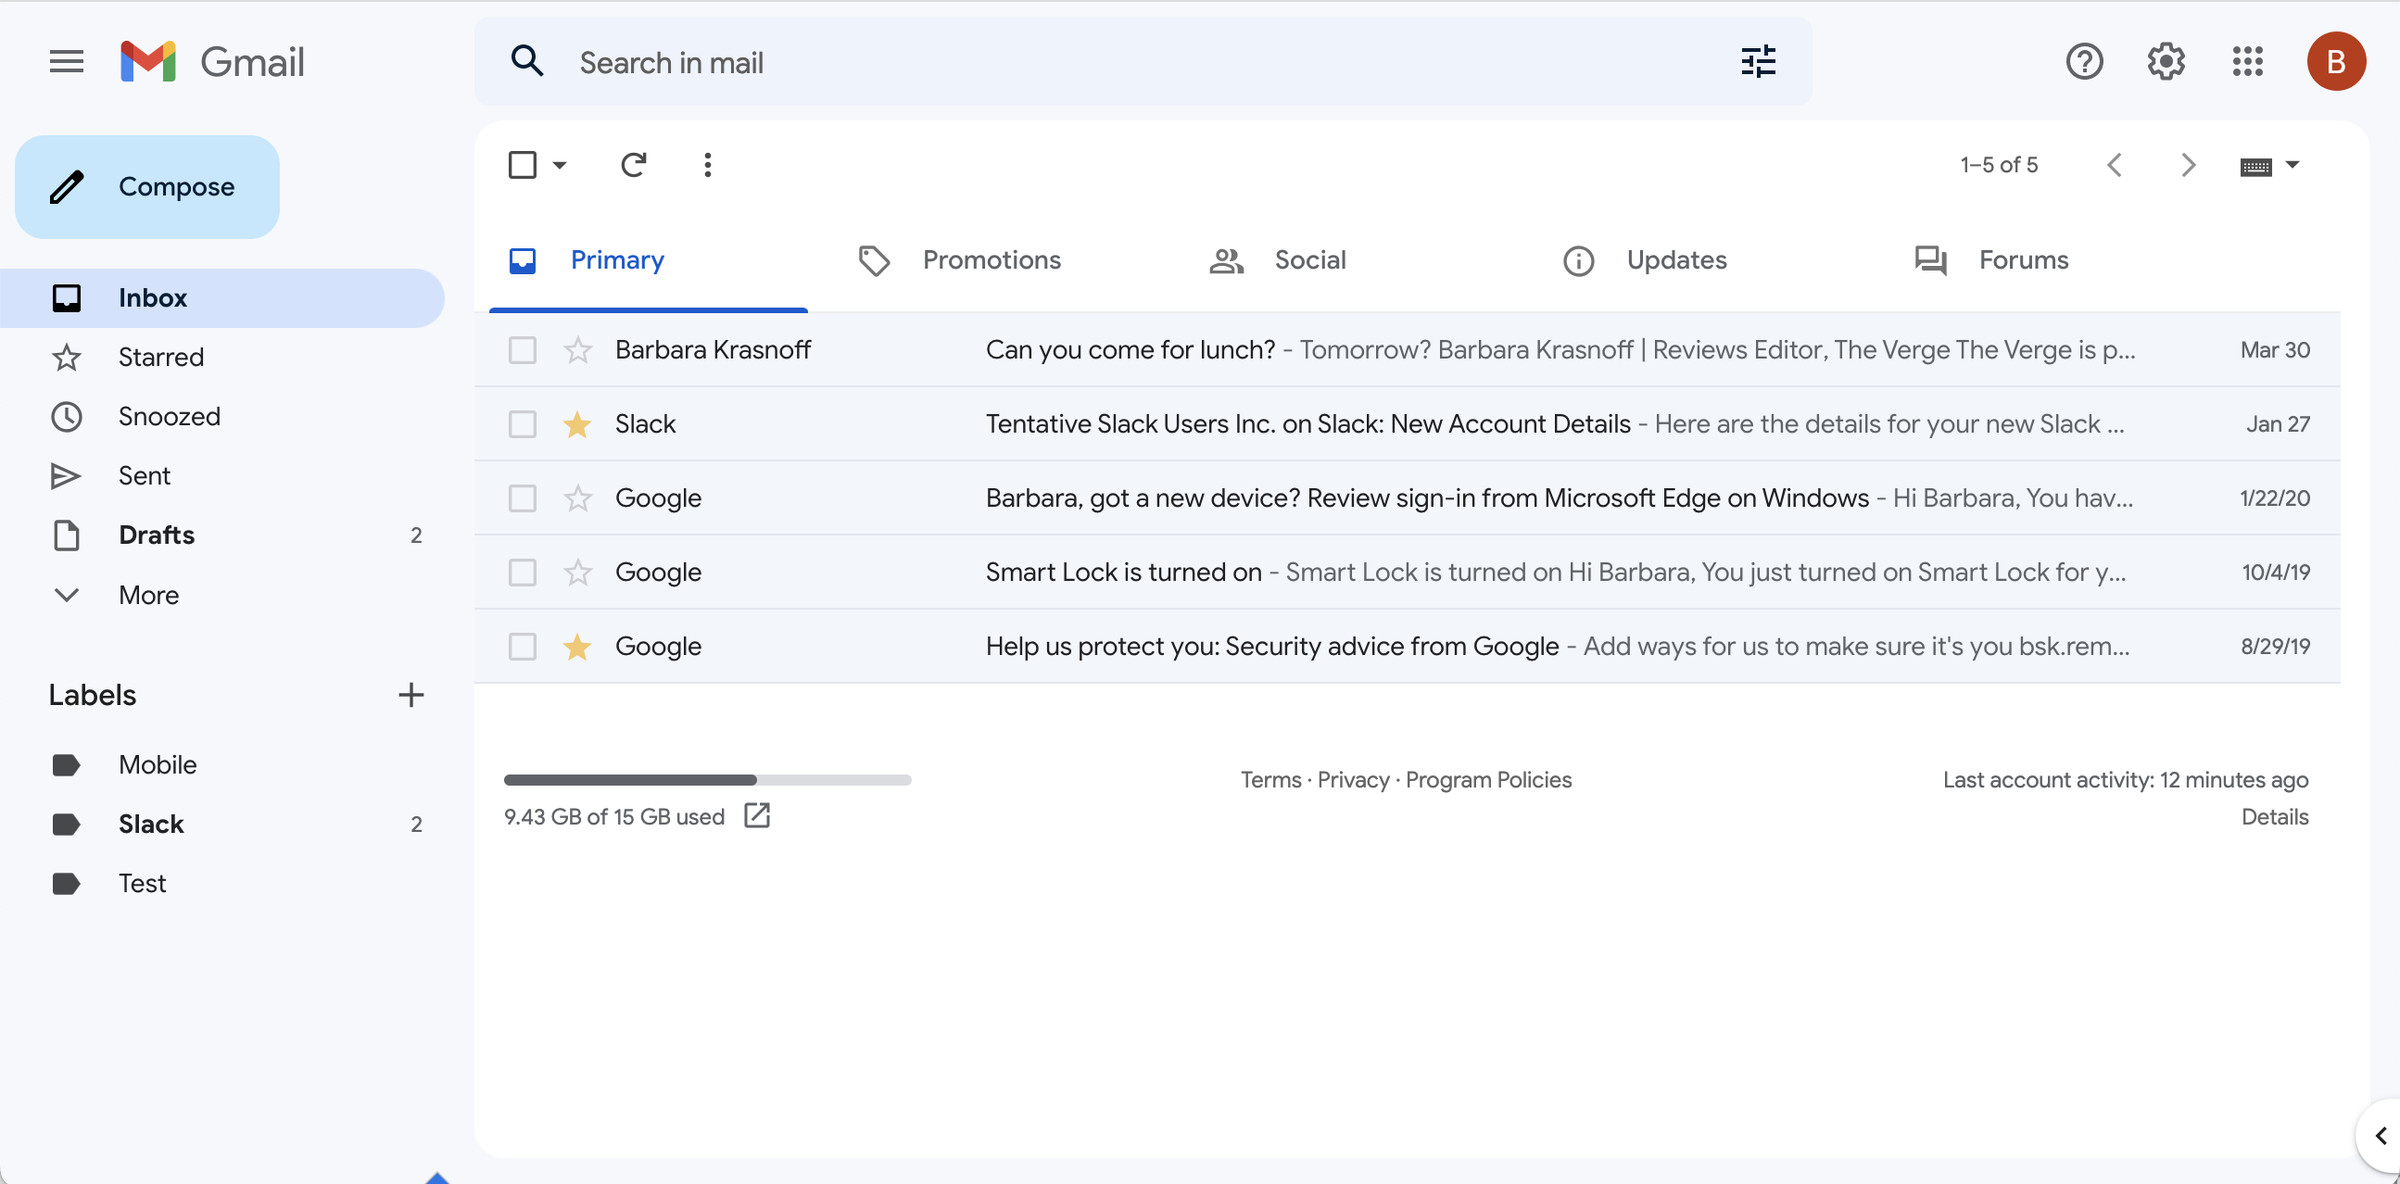 You now have the new Gmail without the apps panel.